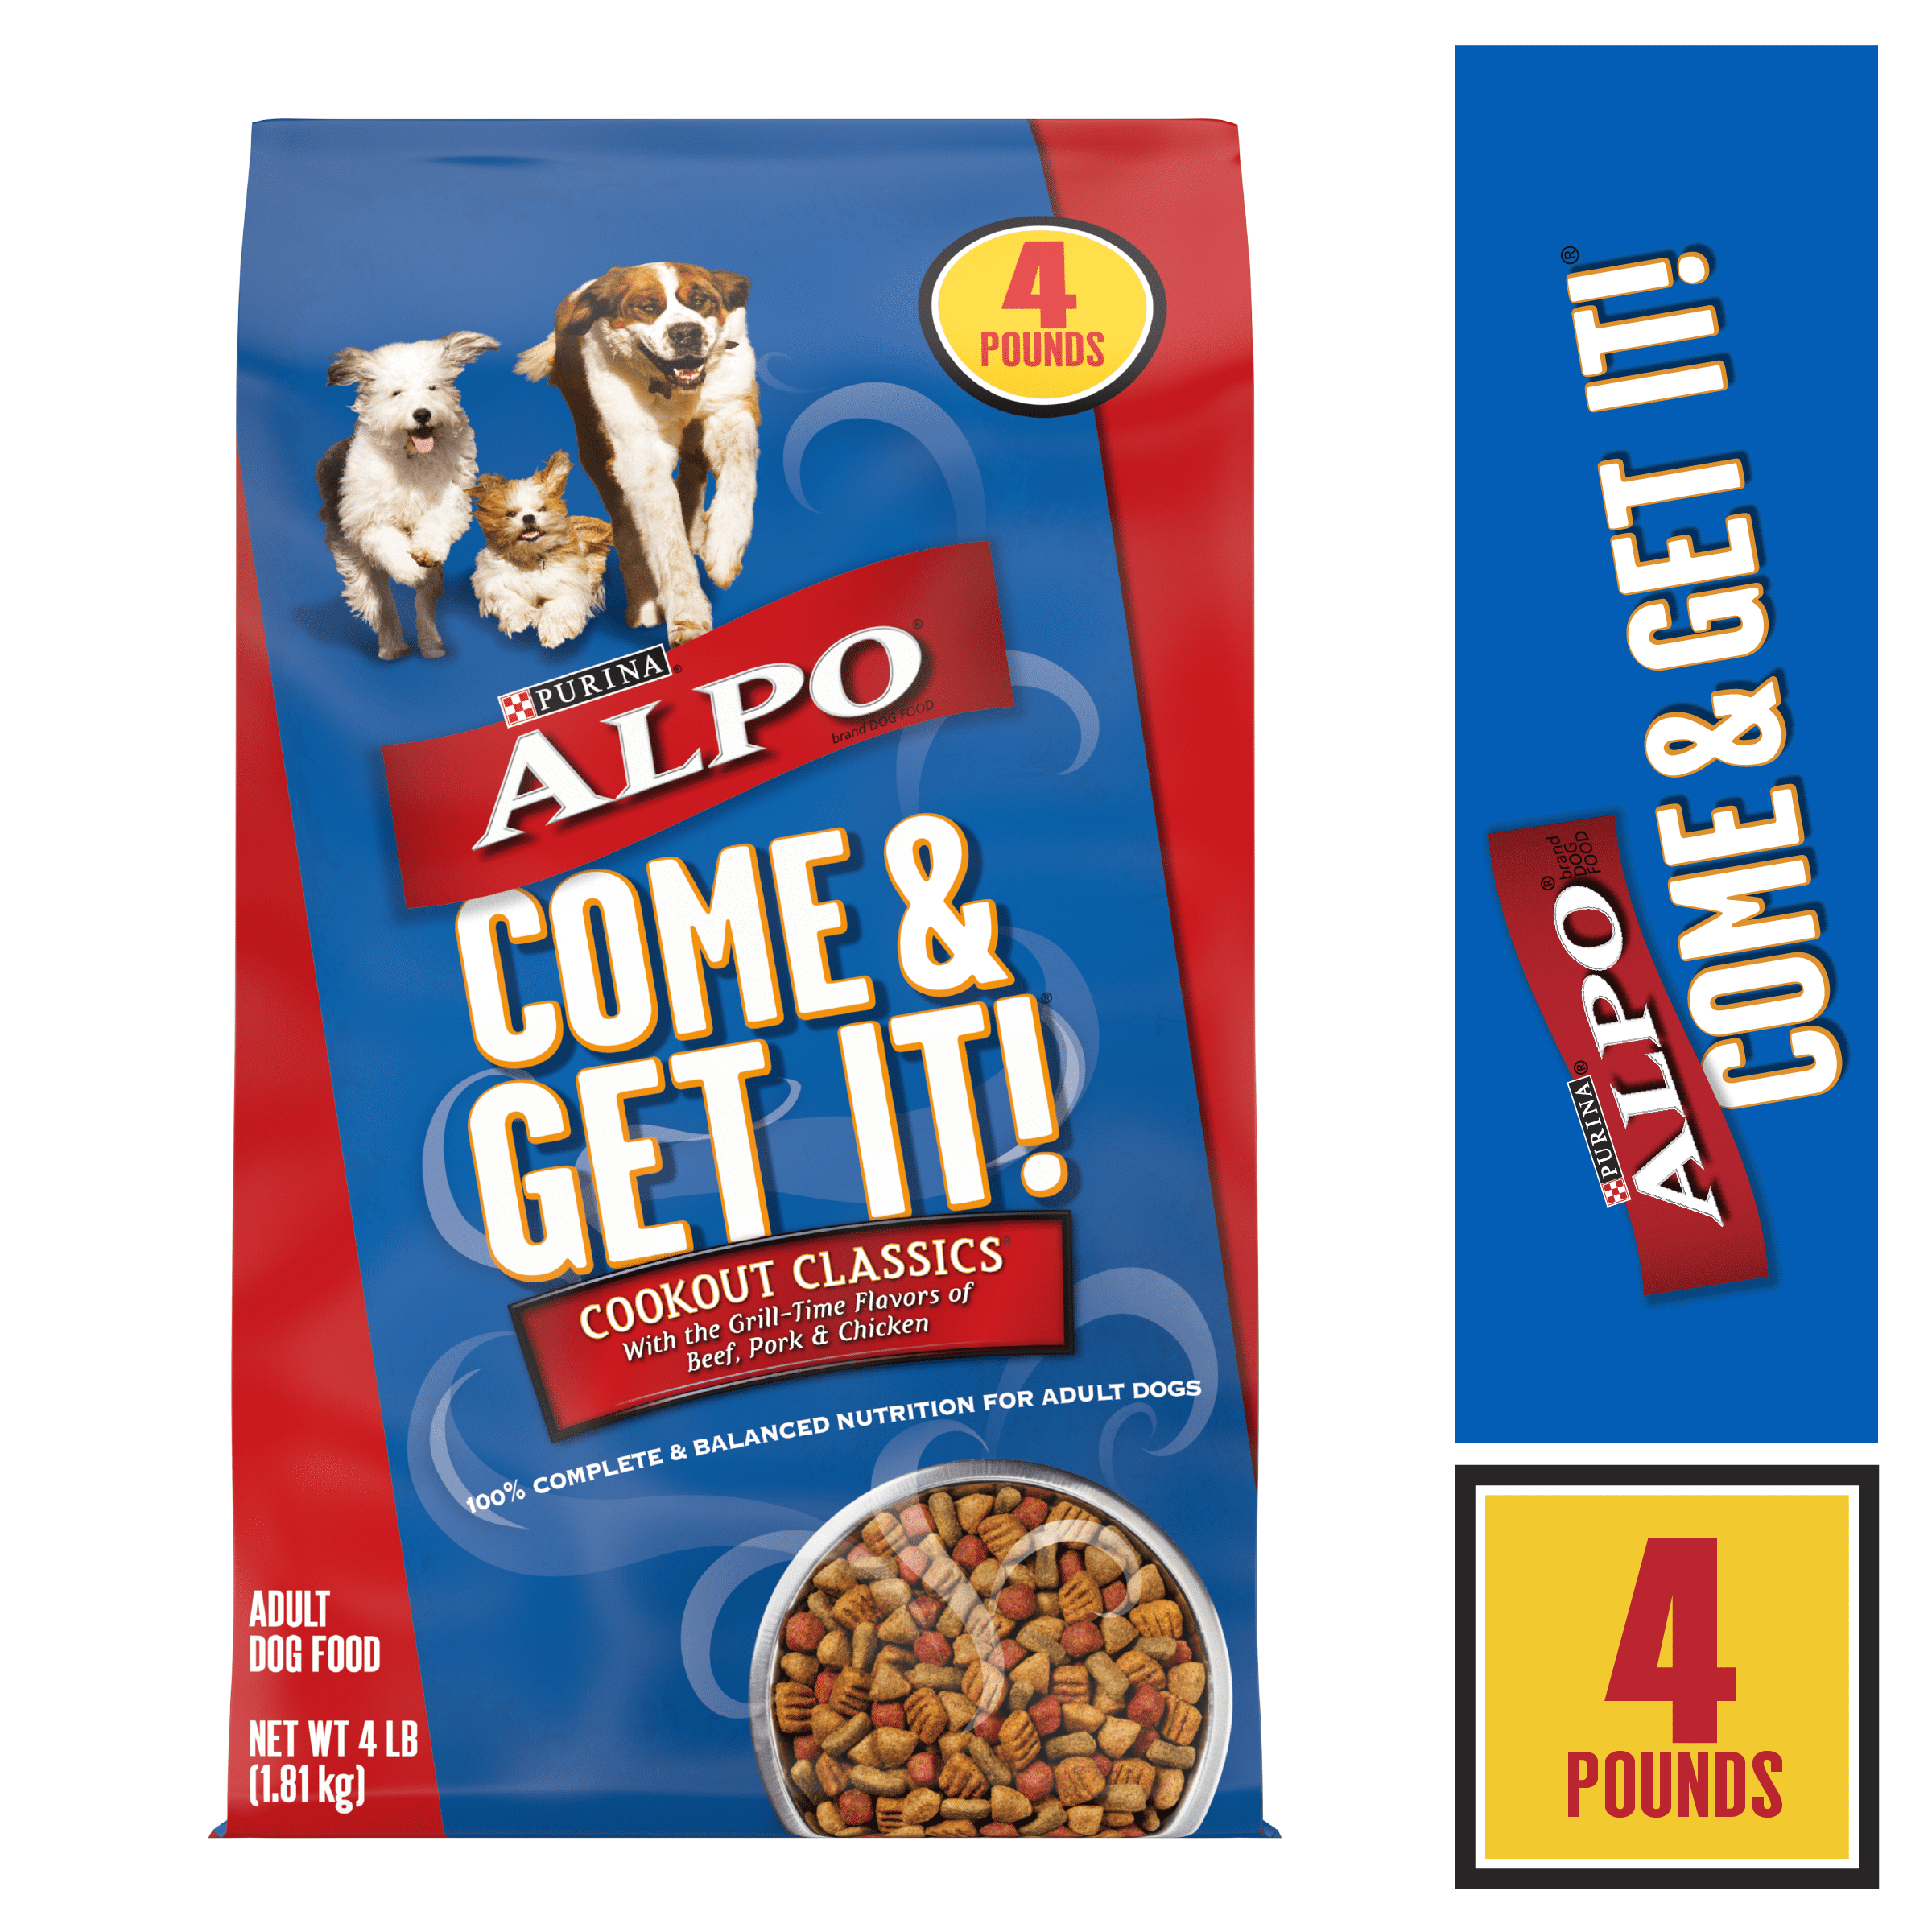 Purina ALPO Dry Dog Food Come & Get It! Cookout Classics ...